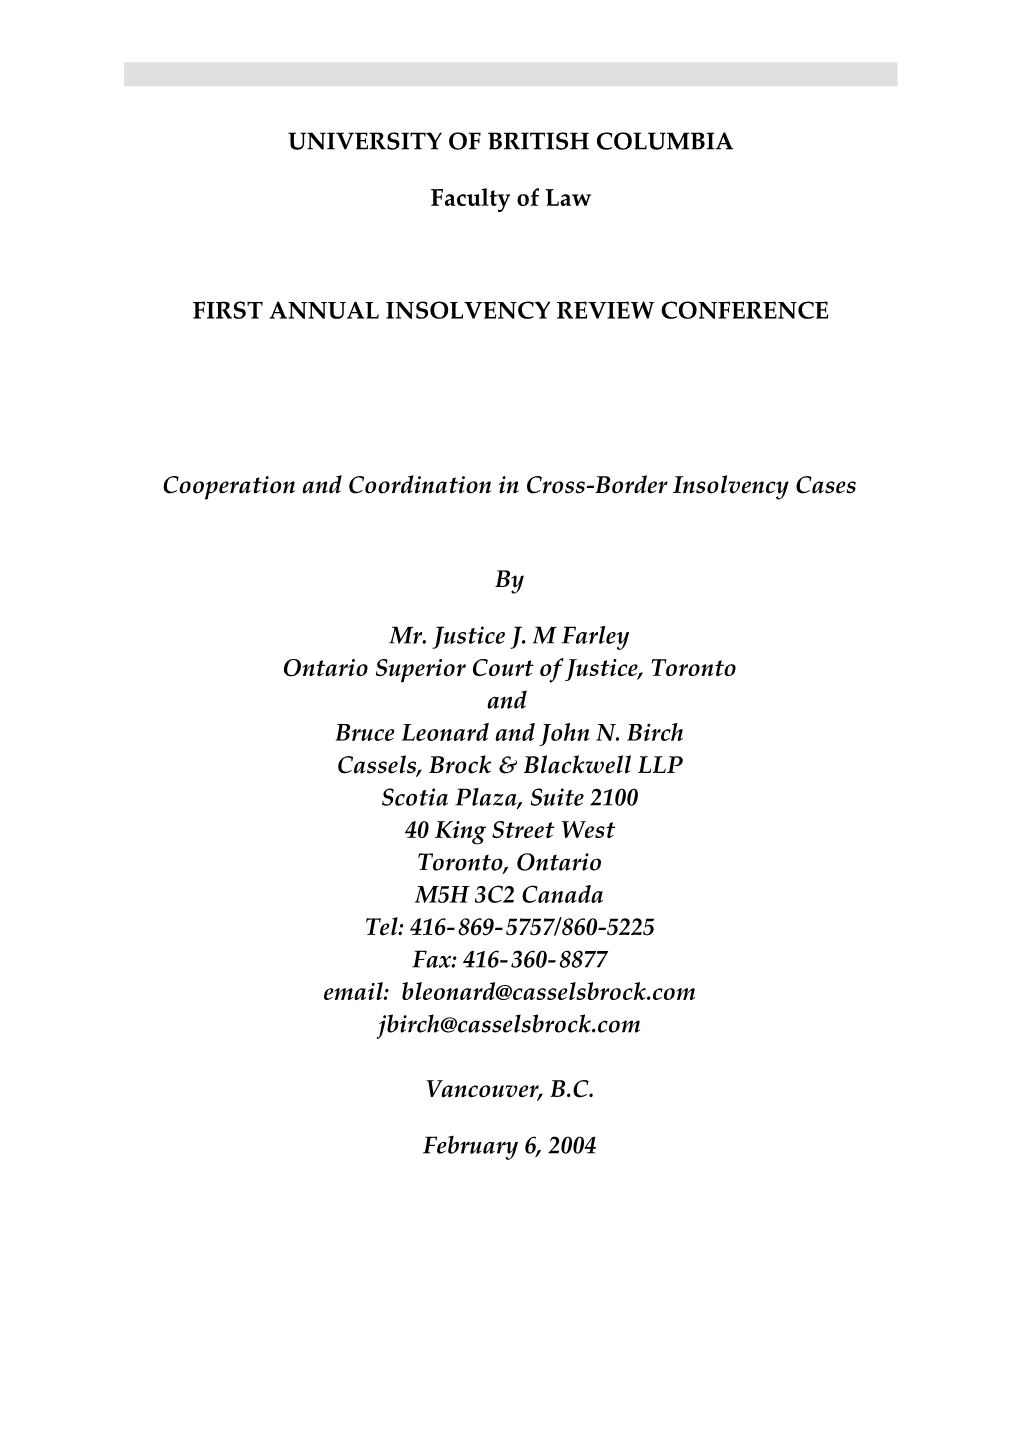 First Annual Insolvency Review Conference